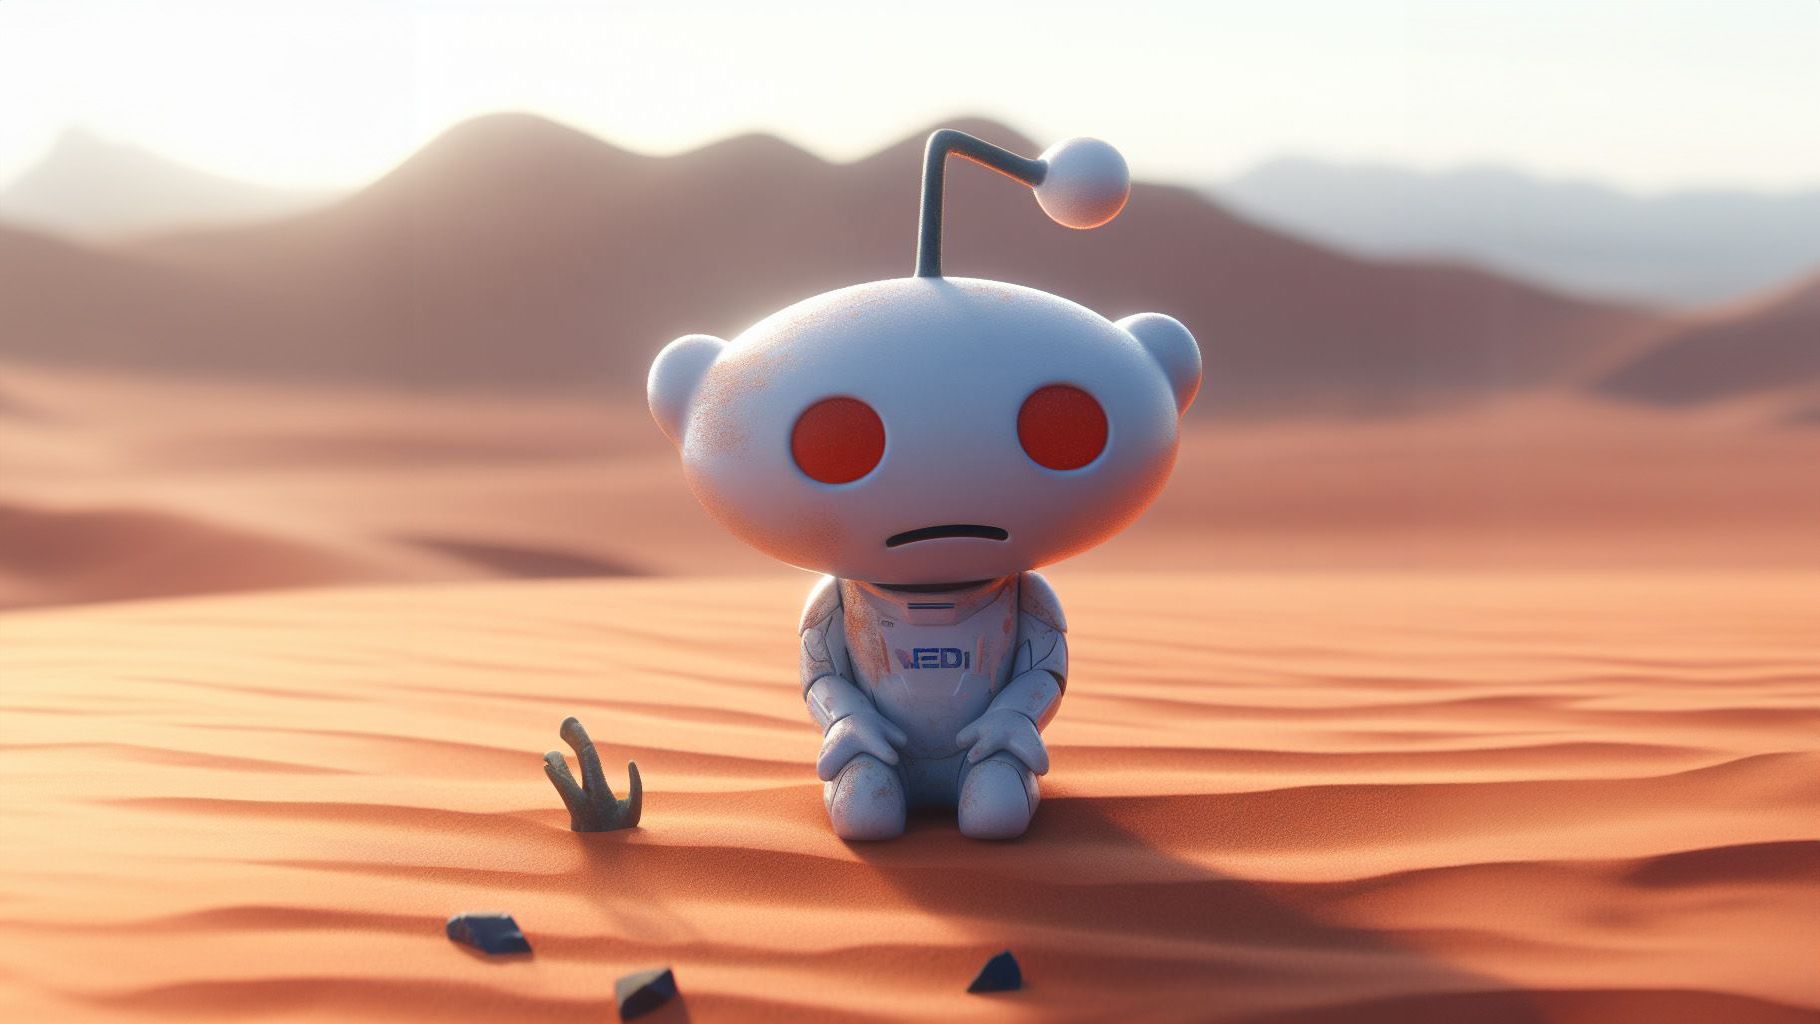 The death of sustainable Reddit apps